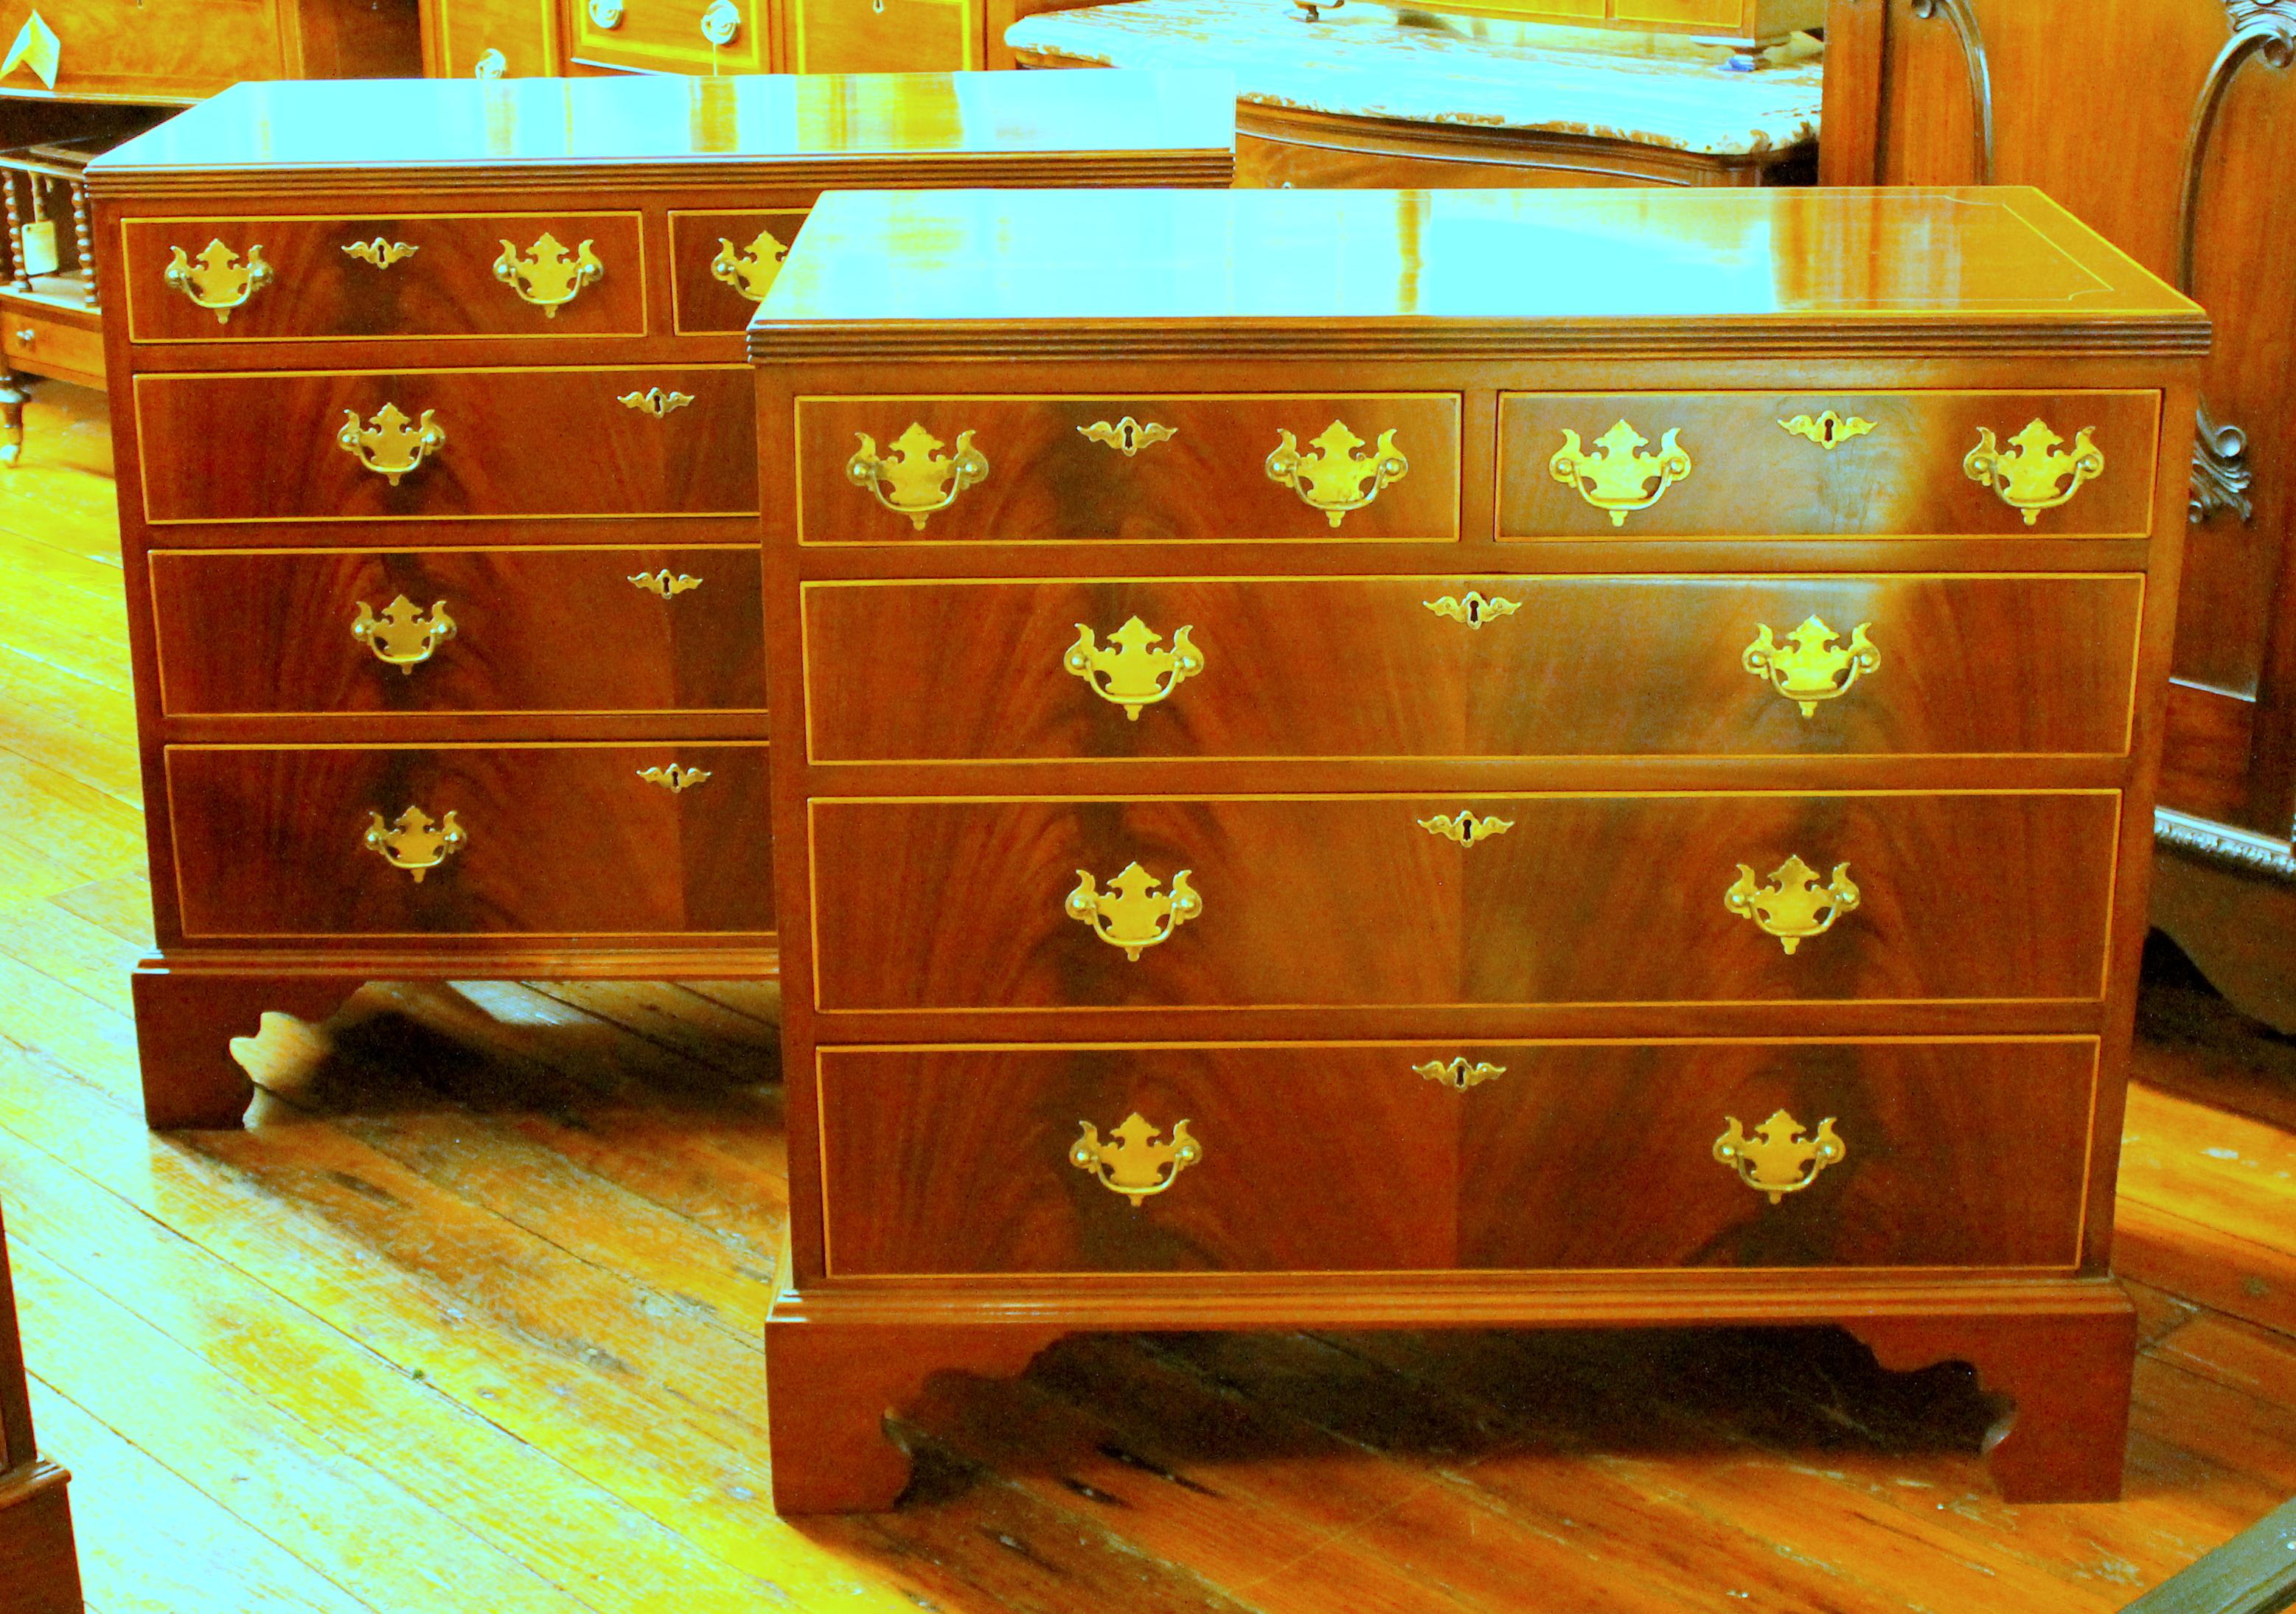 George IV Antique English Inlaid Book-Matched Crotch Mahogany Low Chests of Drawers, Pair 